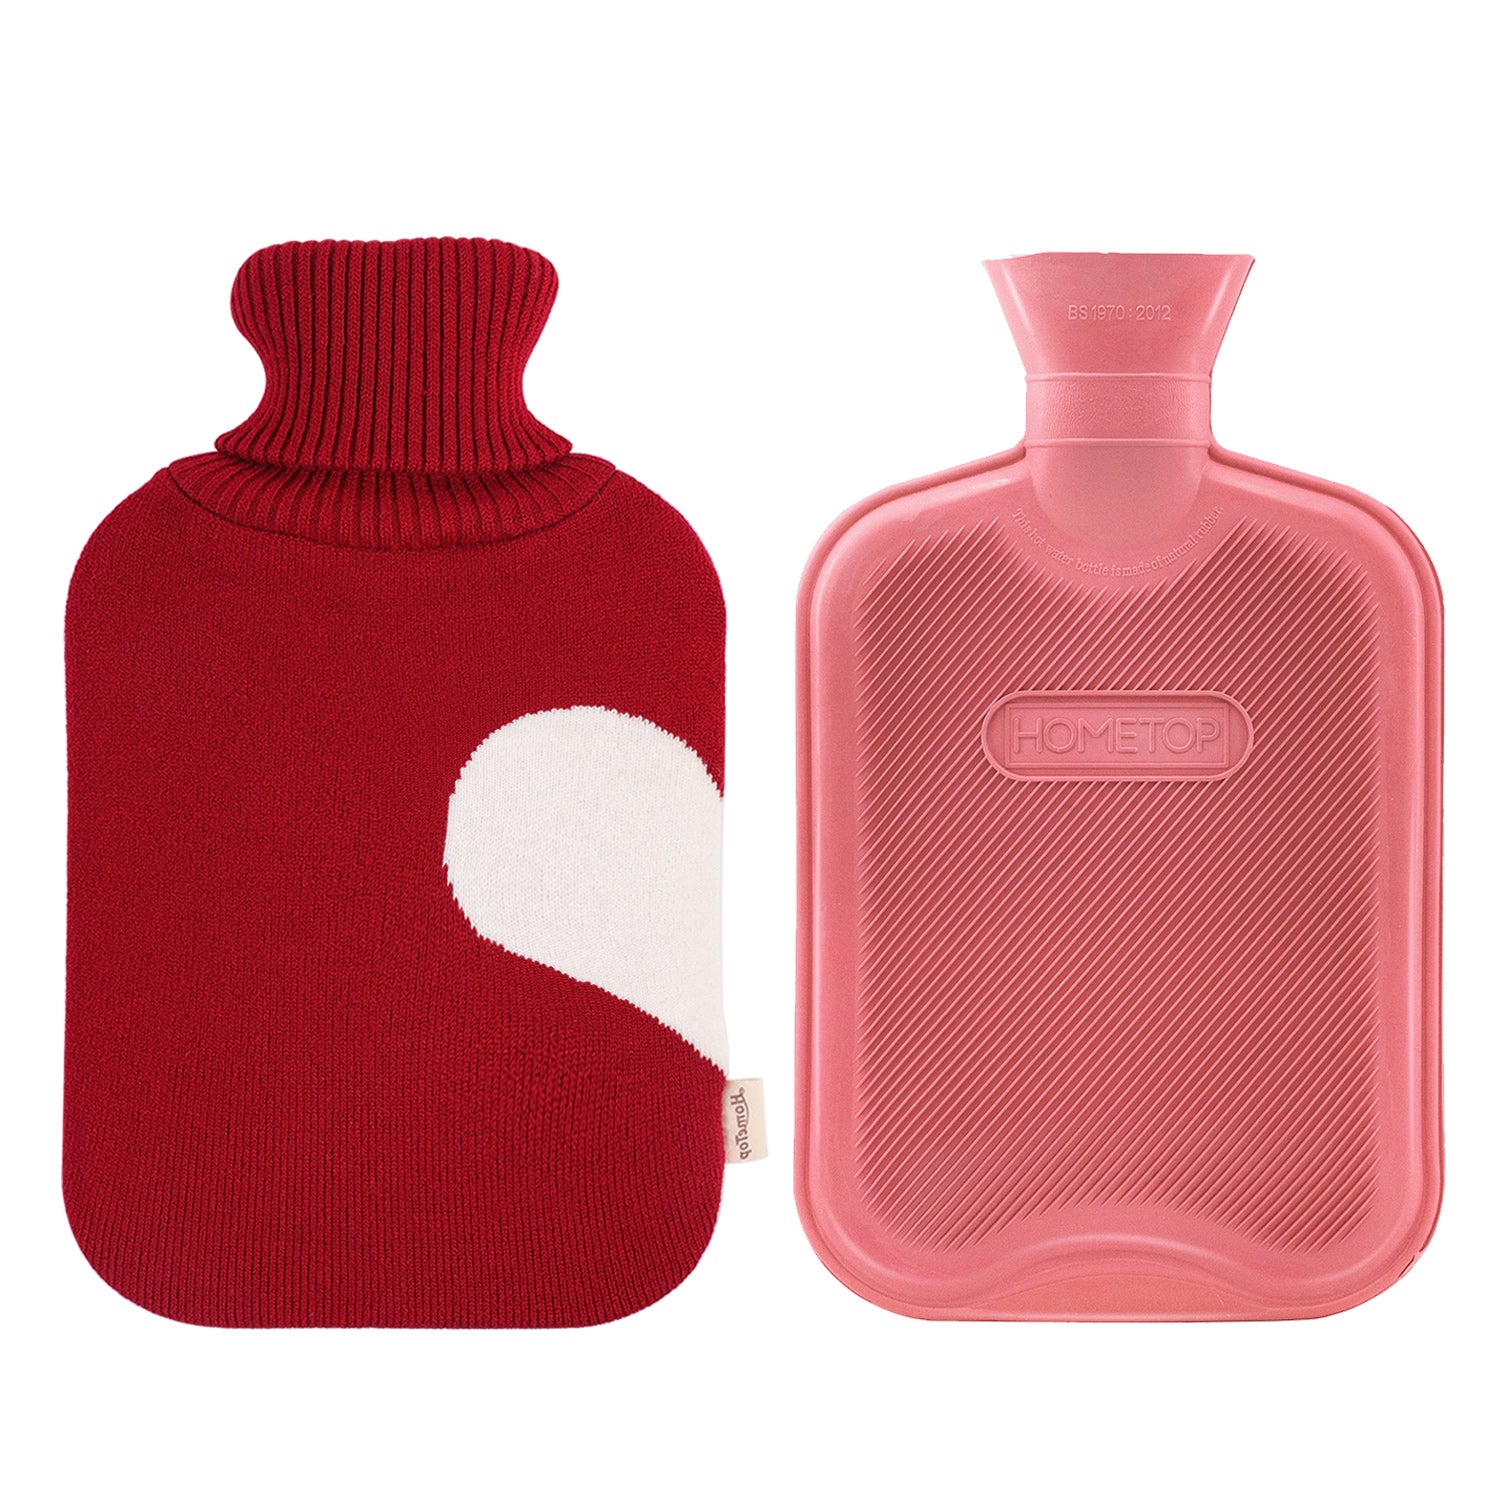 Hot Water Bottle, Rubber, Best Quality